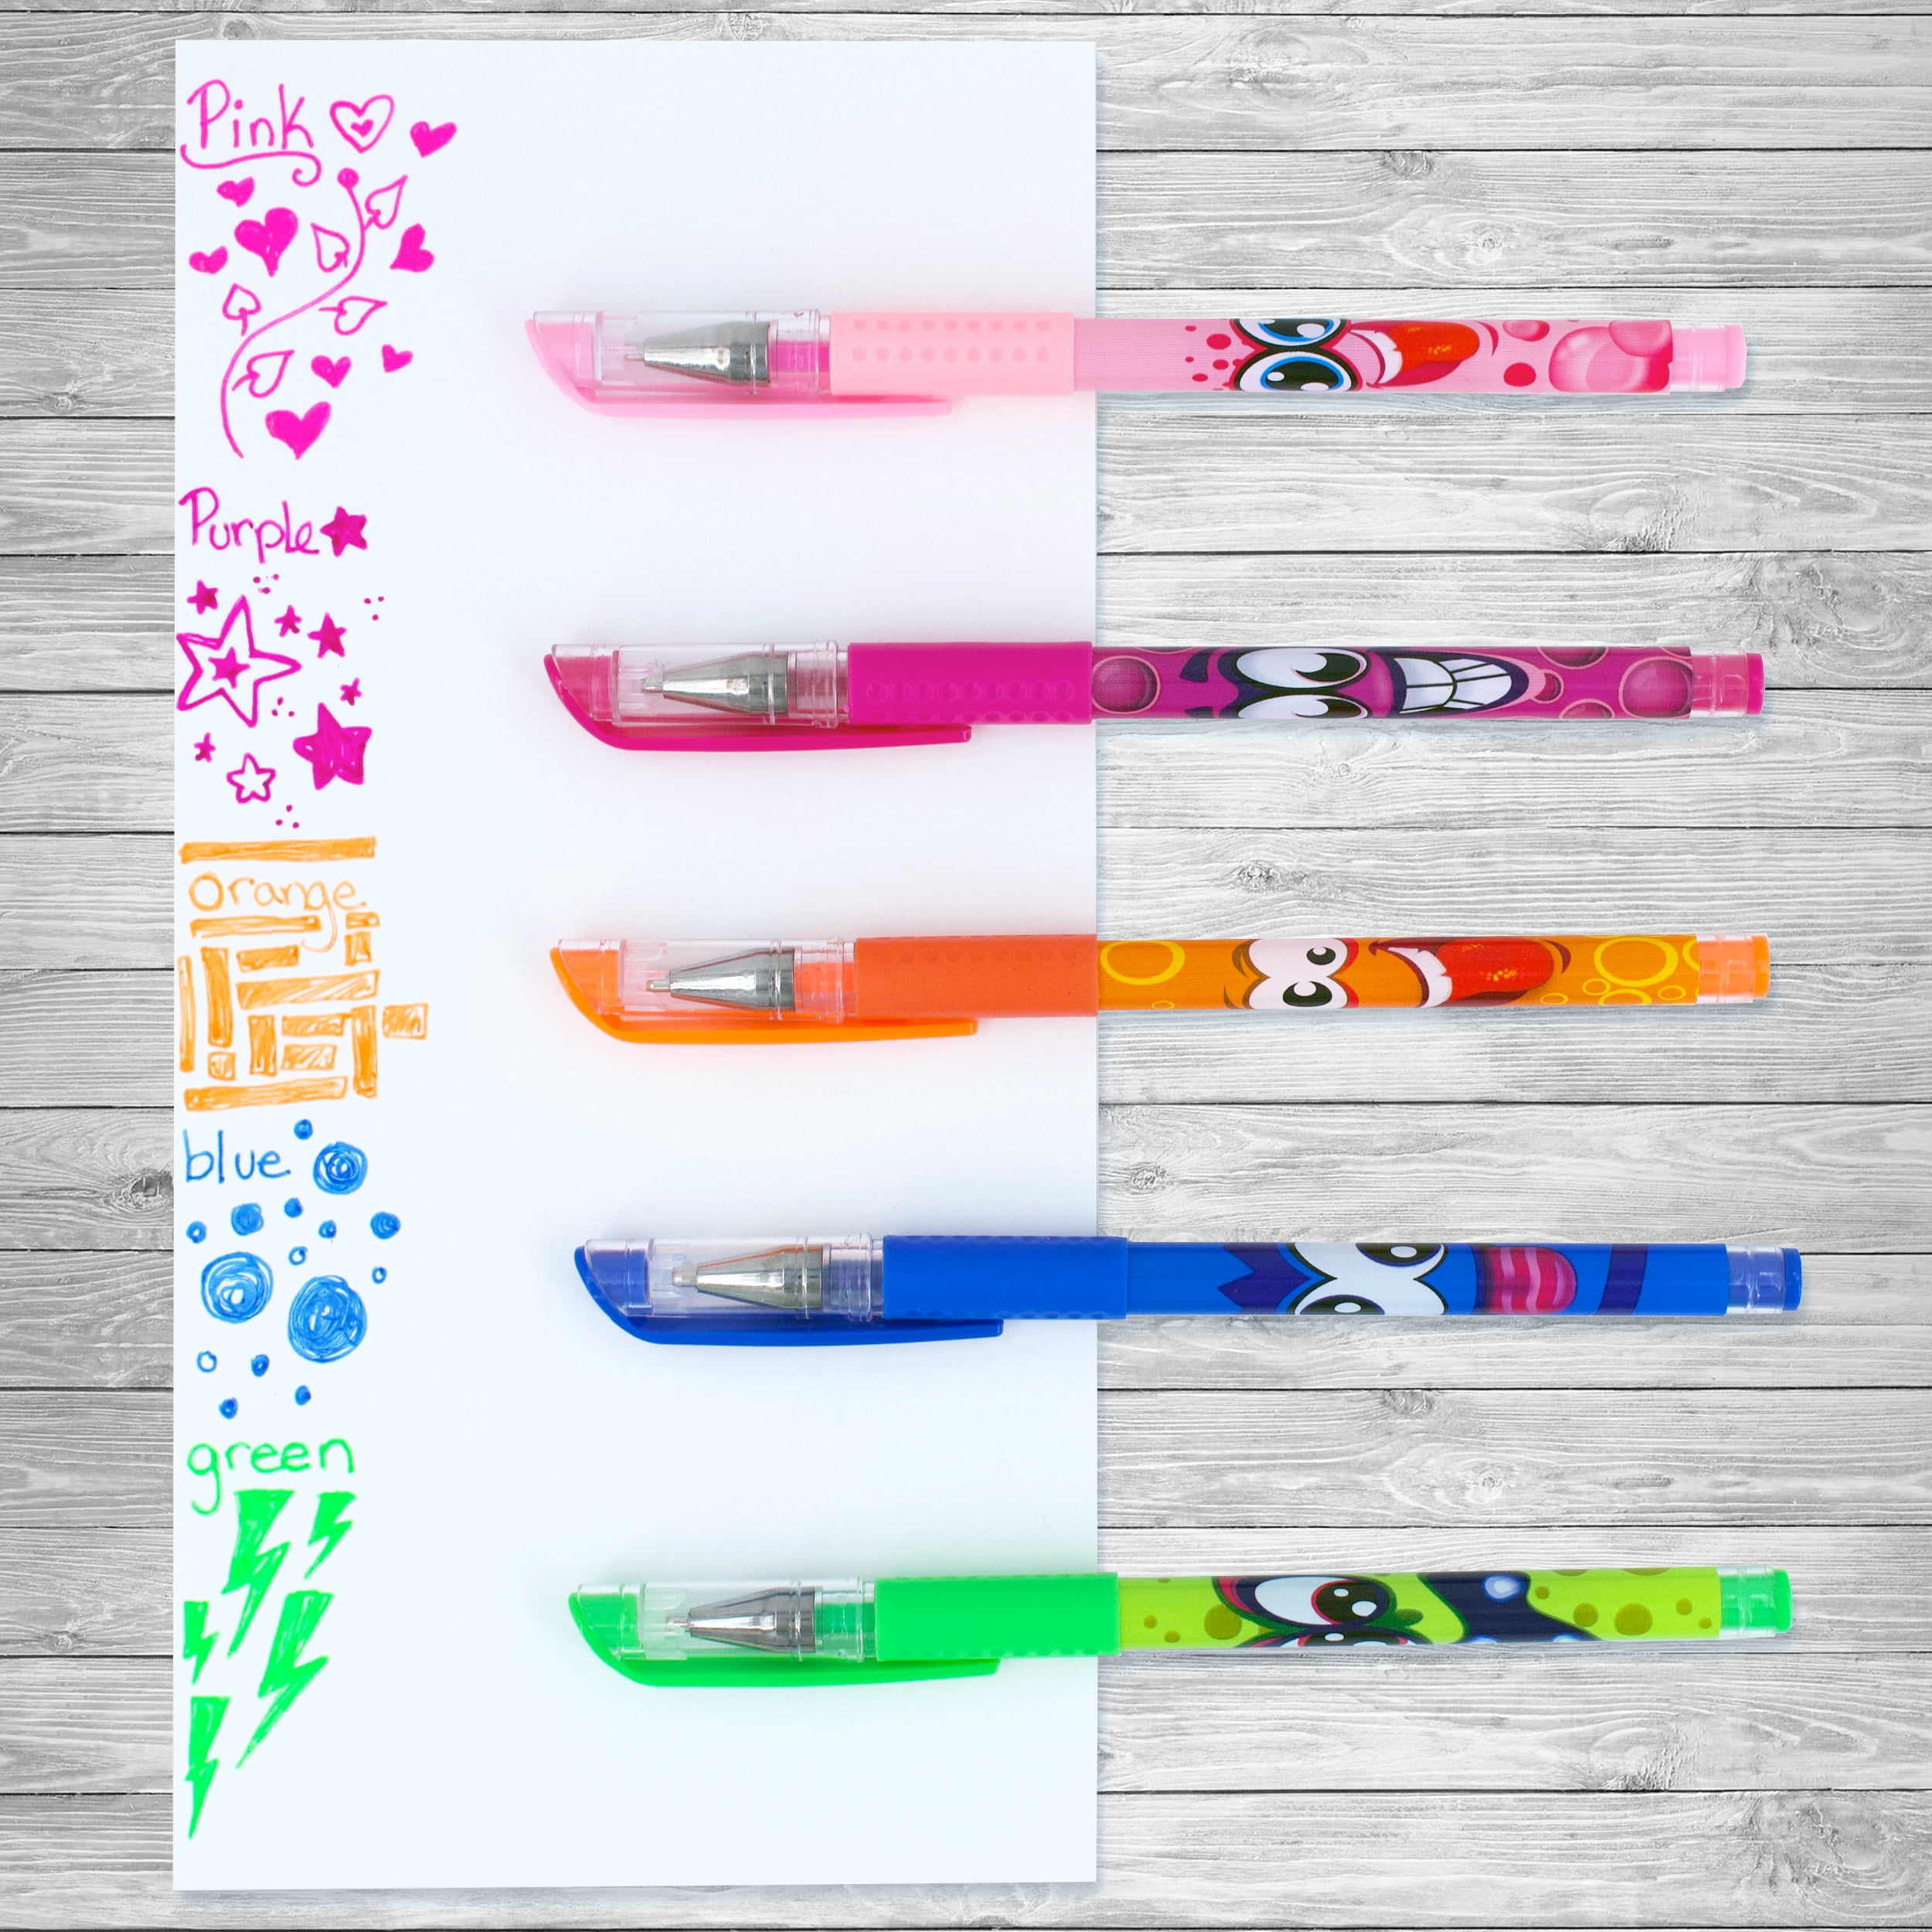 Scentos Scented Gel Pens for Kids - Assorted Colorful Pens - Fine Point Gel  Pen Set - For Ages 3 and Up - 24 Count